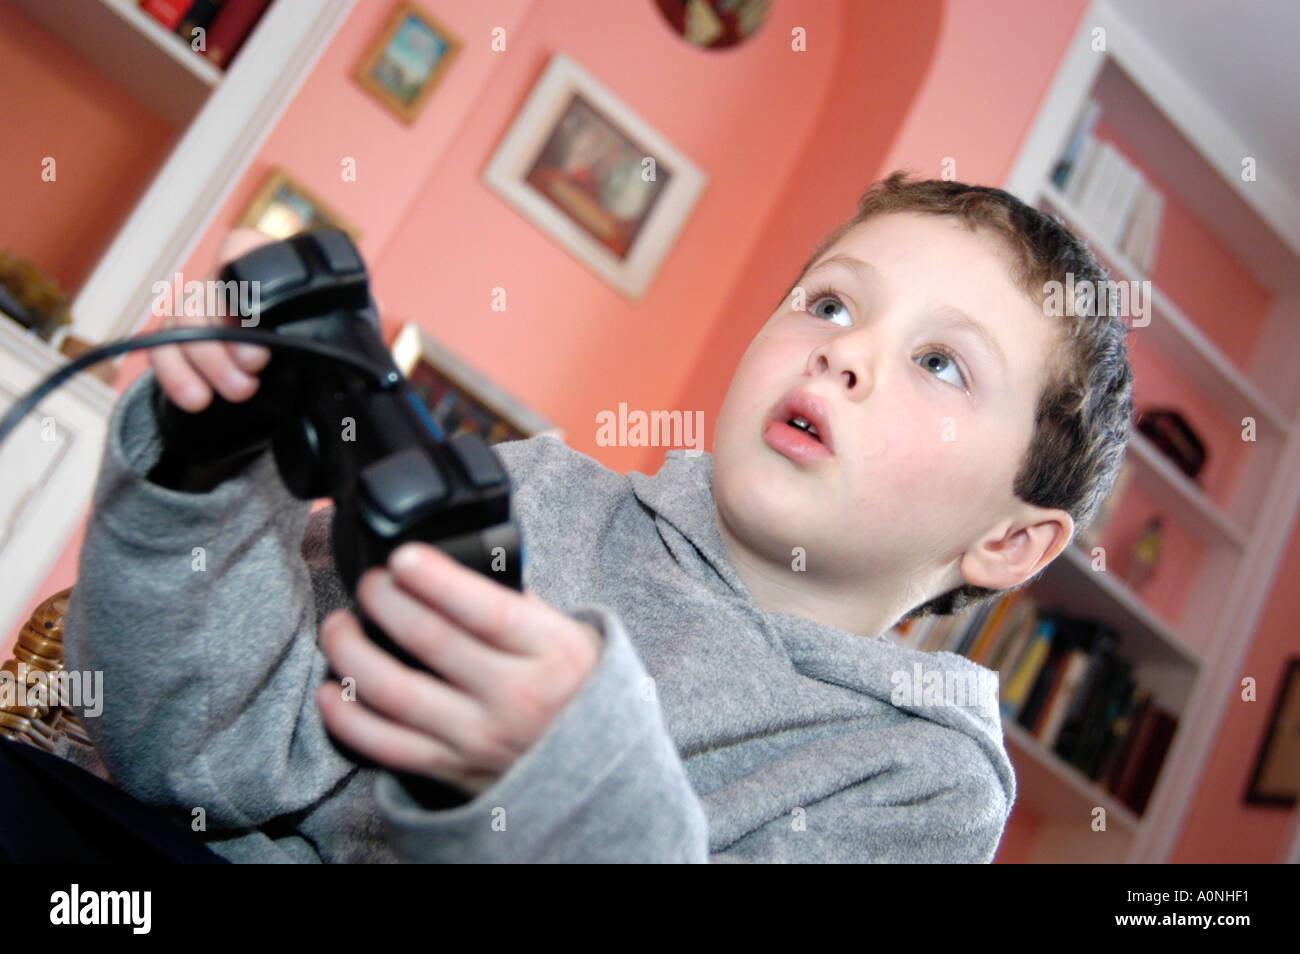 Young boy of 6 playing computer game on Sony Playstation console, England, UK Stock Photo